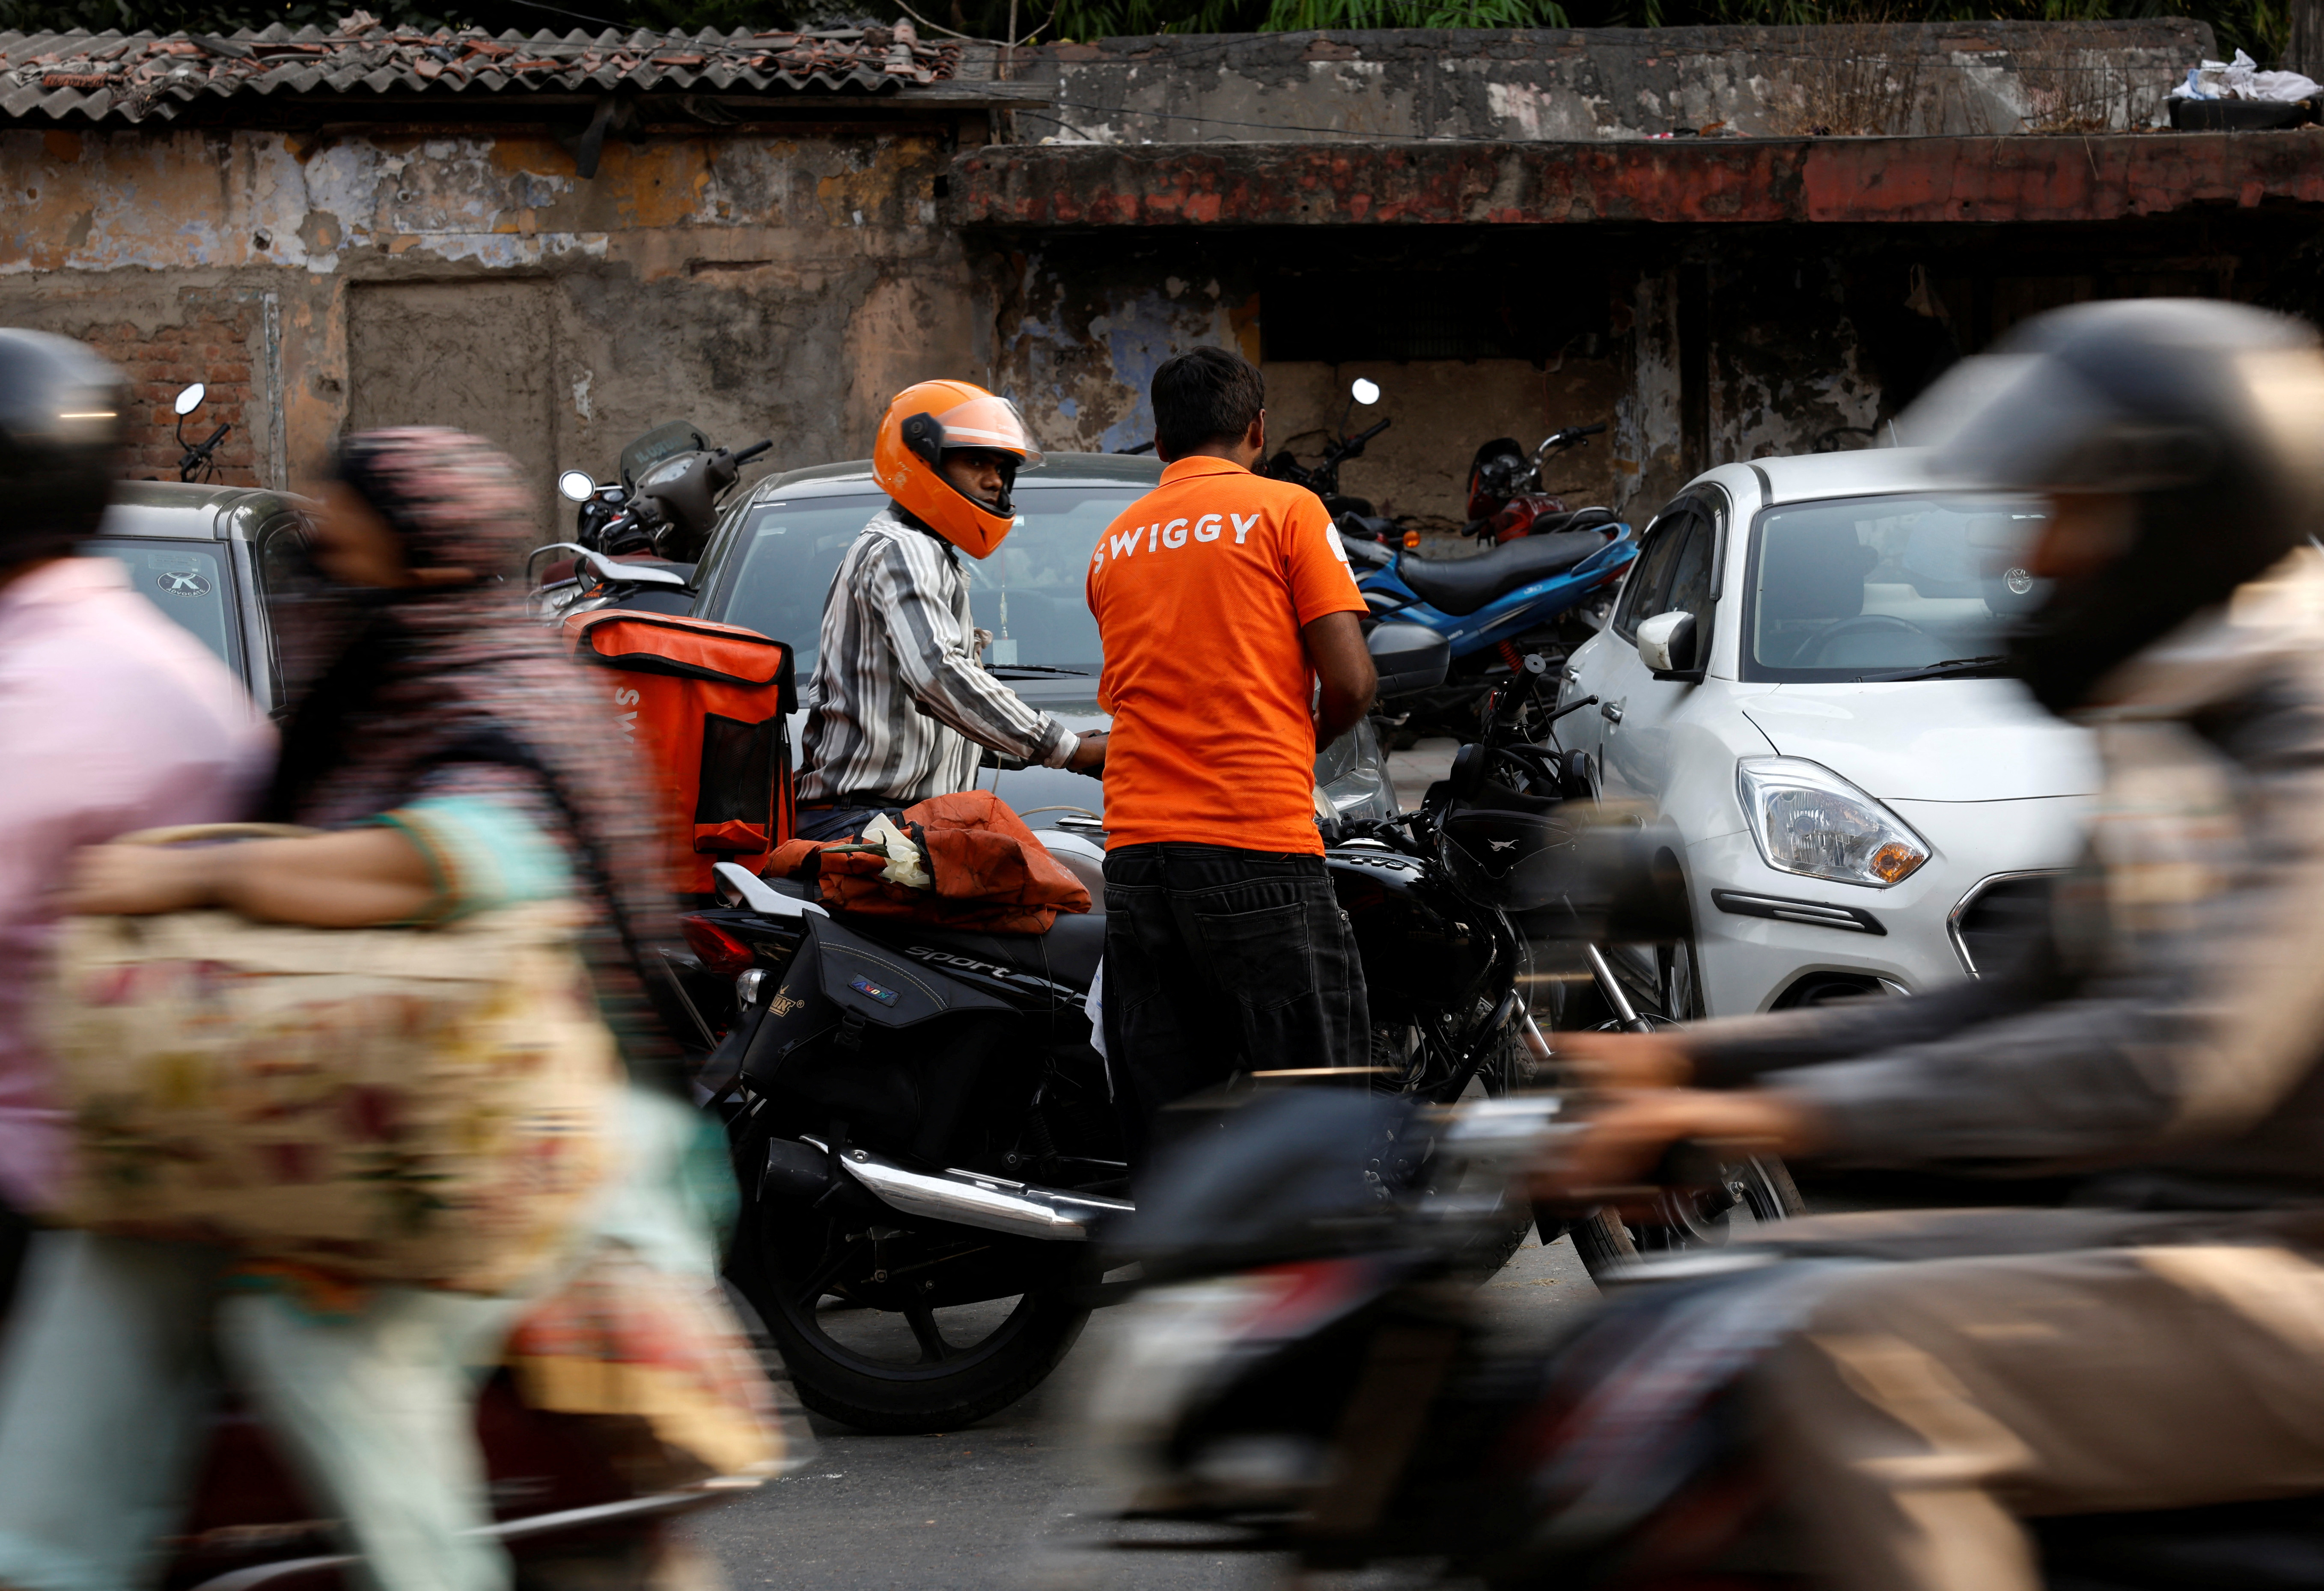 Gig workers prepare to get the orders delivered after picking them up from Swiggy's grocery warehouse, in New Delhi